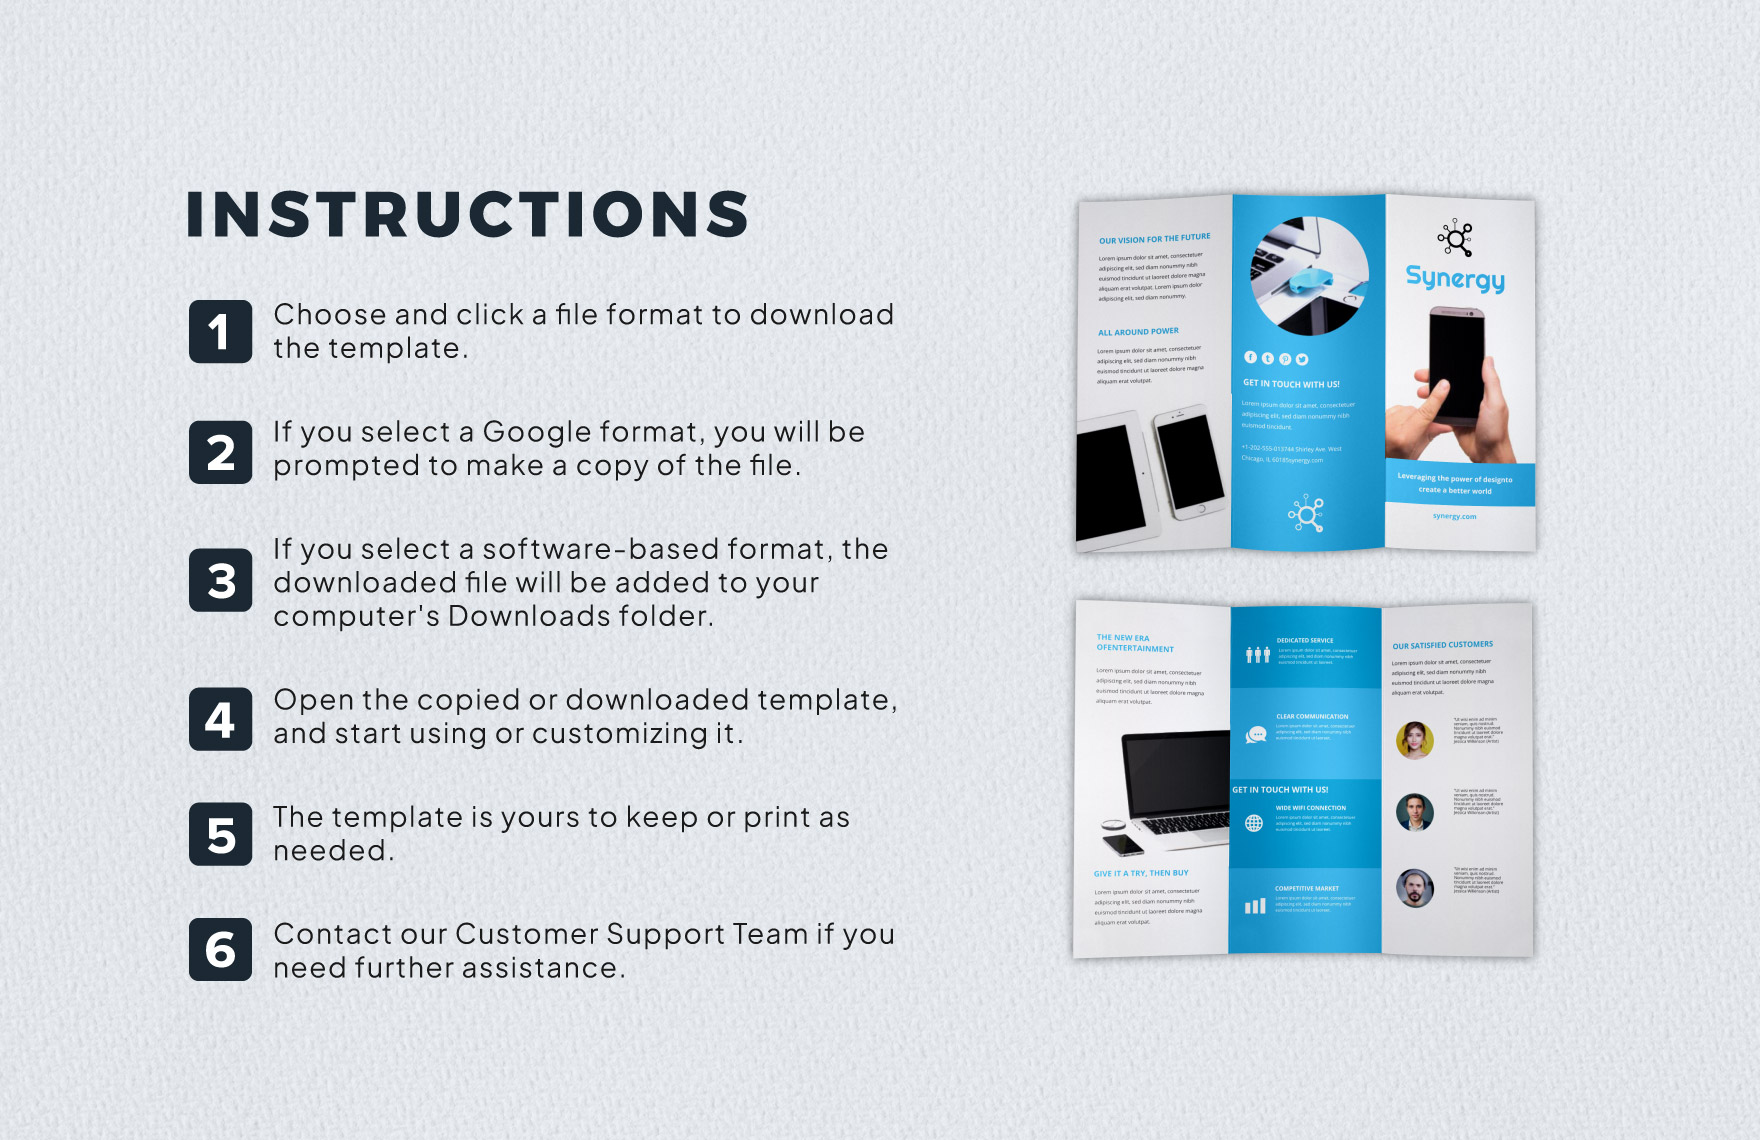 Product Brochure template